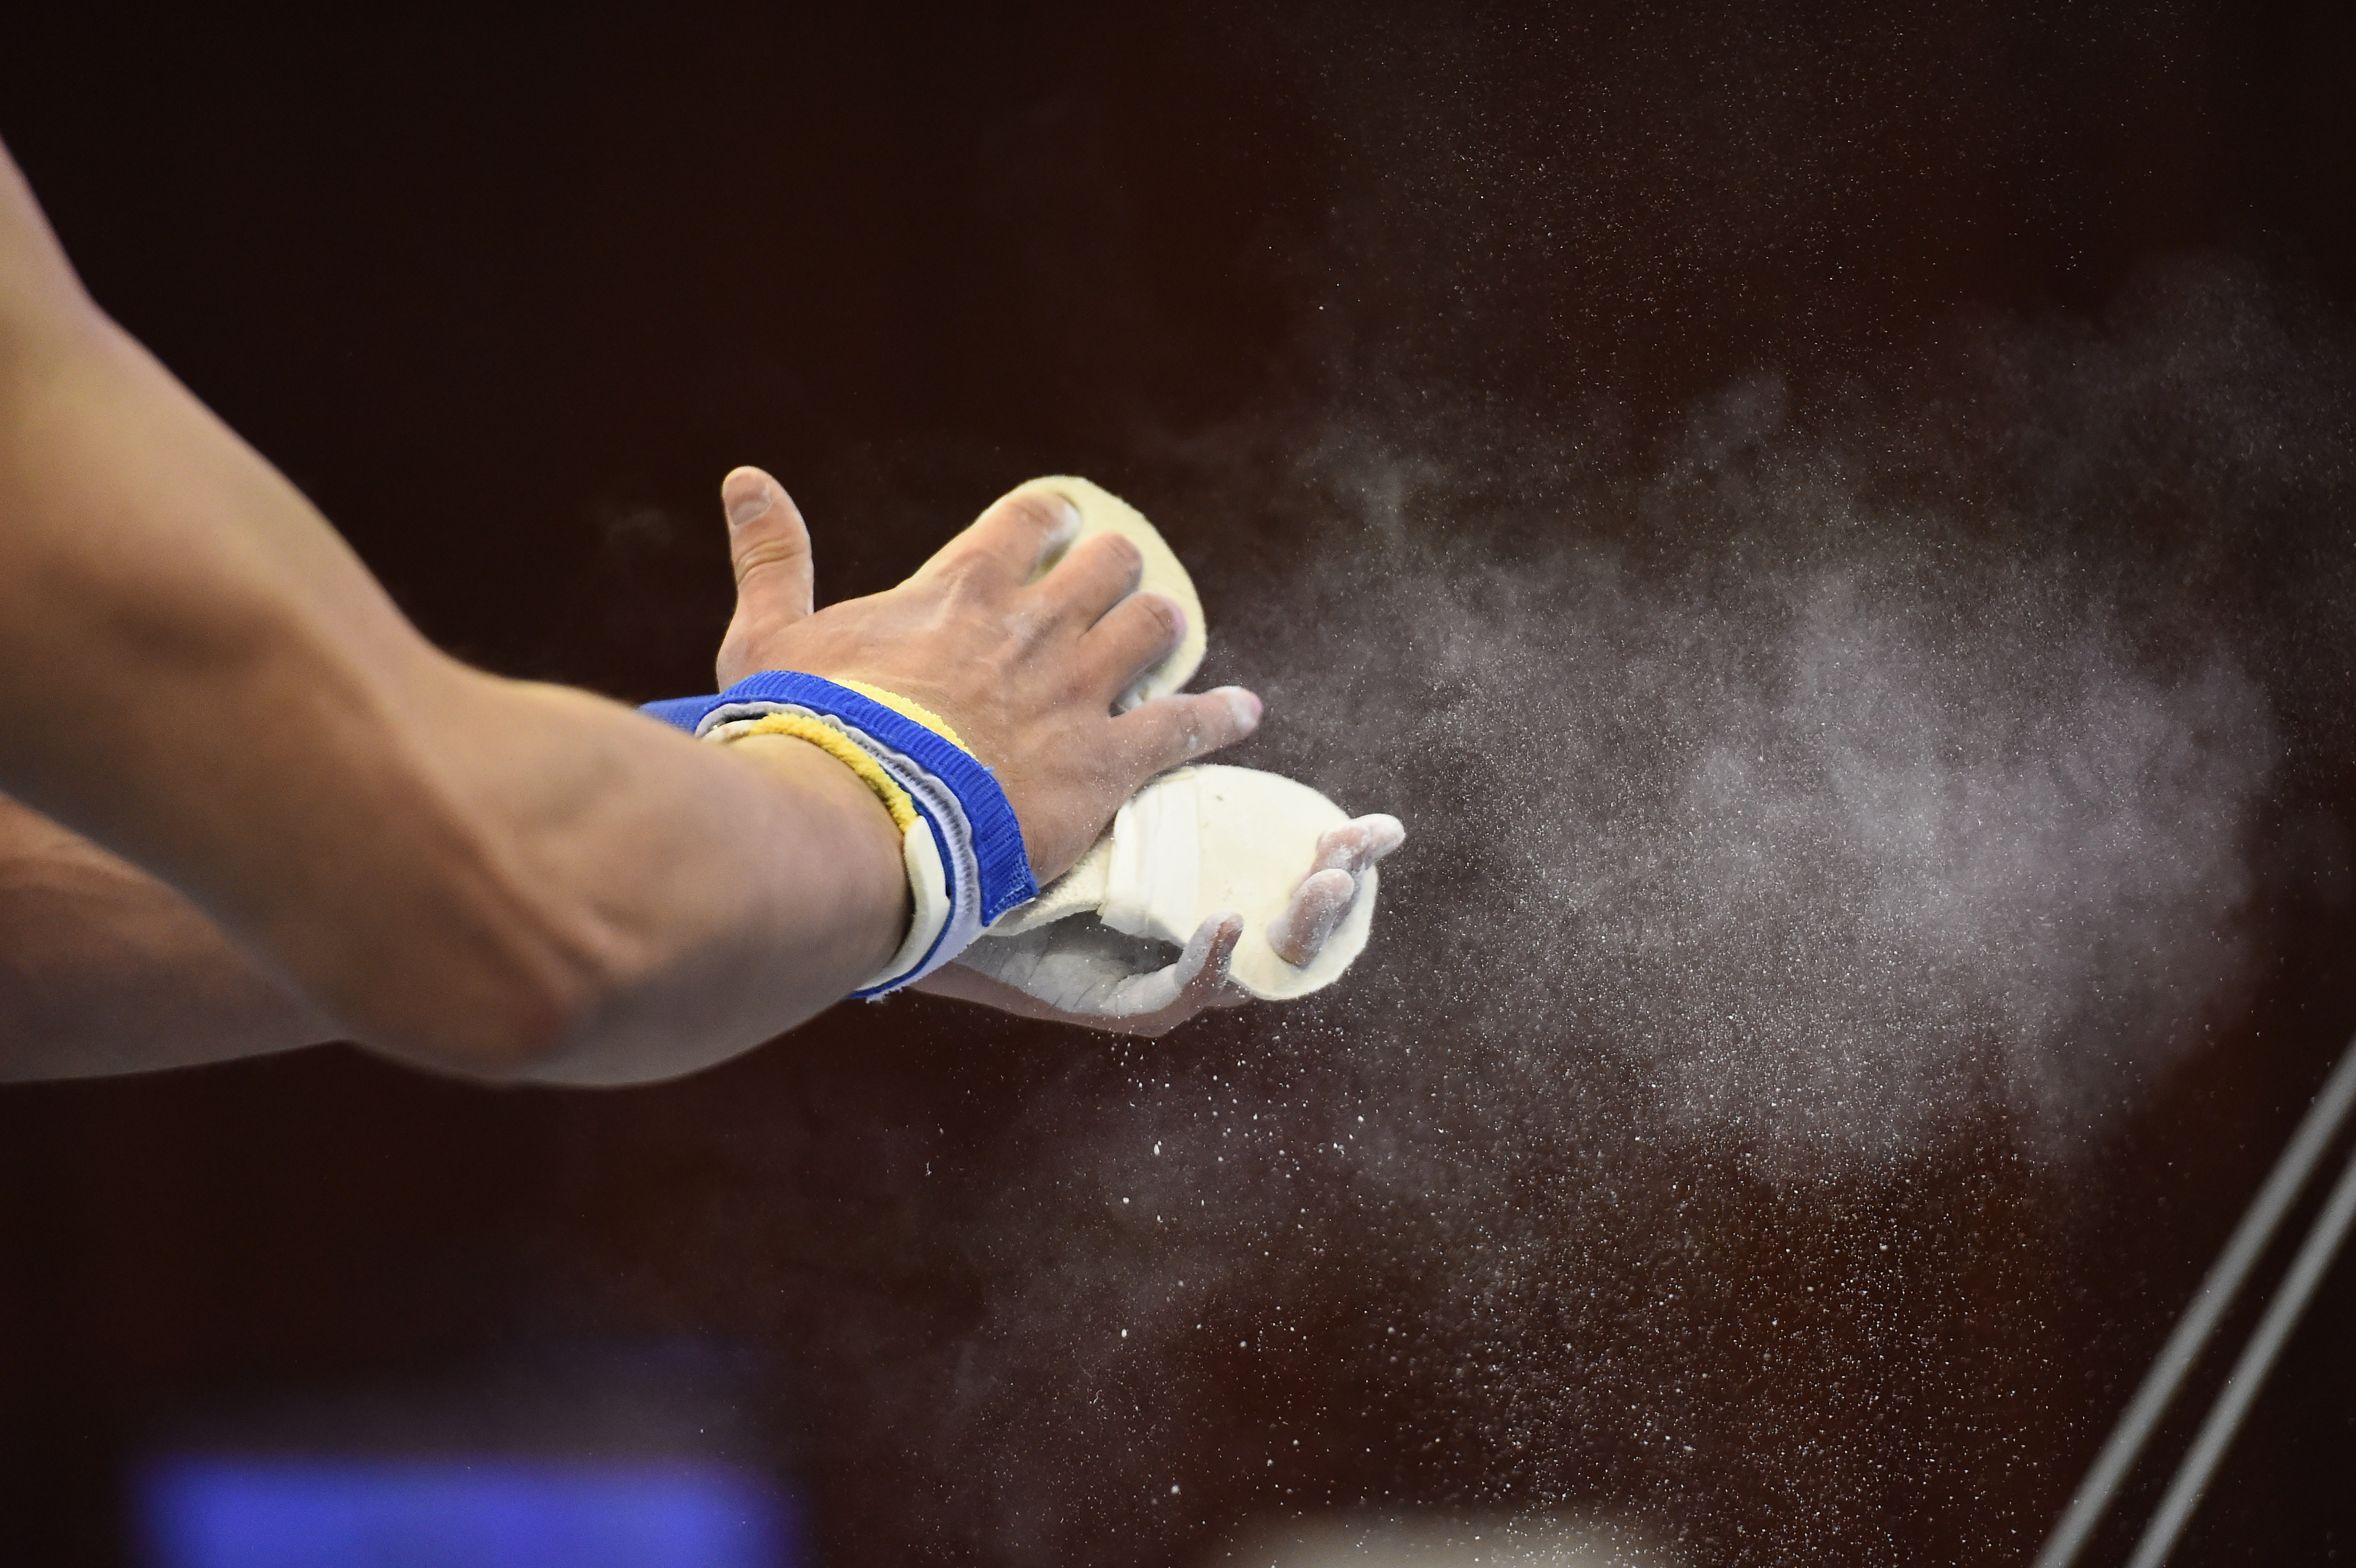 two hands slapping apart resin to help the gymnast with their flips